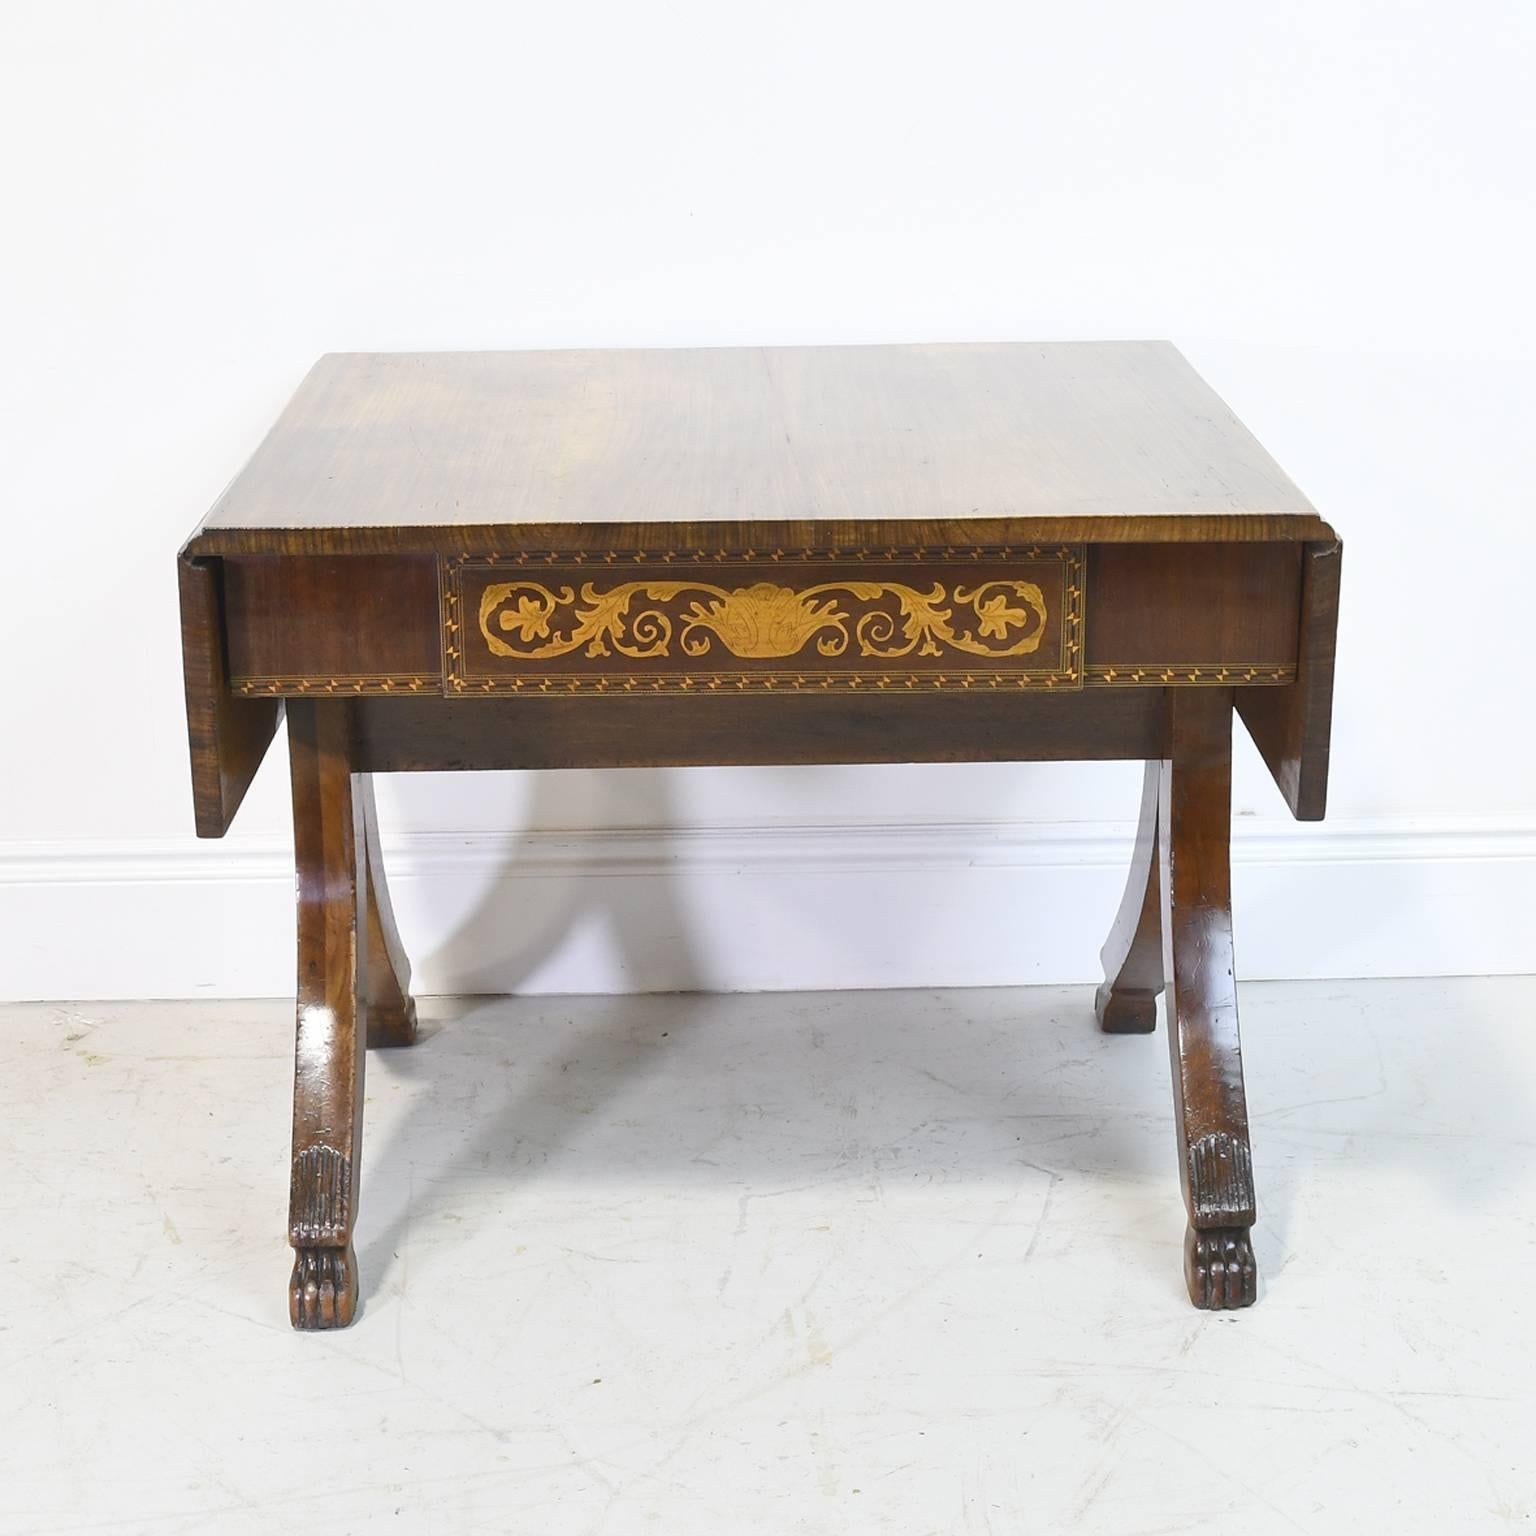 A handsome Italian Empire desk or sofa table in mahogany with fold-down leaves, and resting over trestle base with splayed legs ending in carved lions' paw feet. Offers one drawer decorated with marquetry inlays in an arabesque design, with the